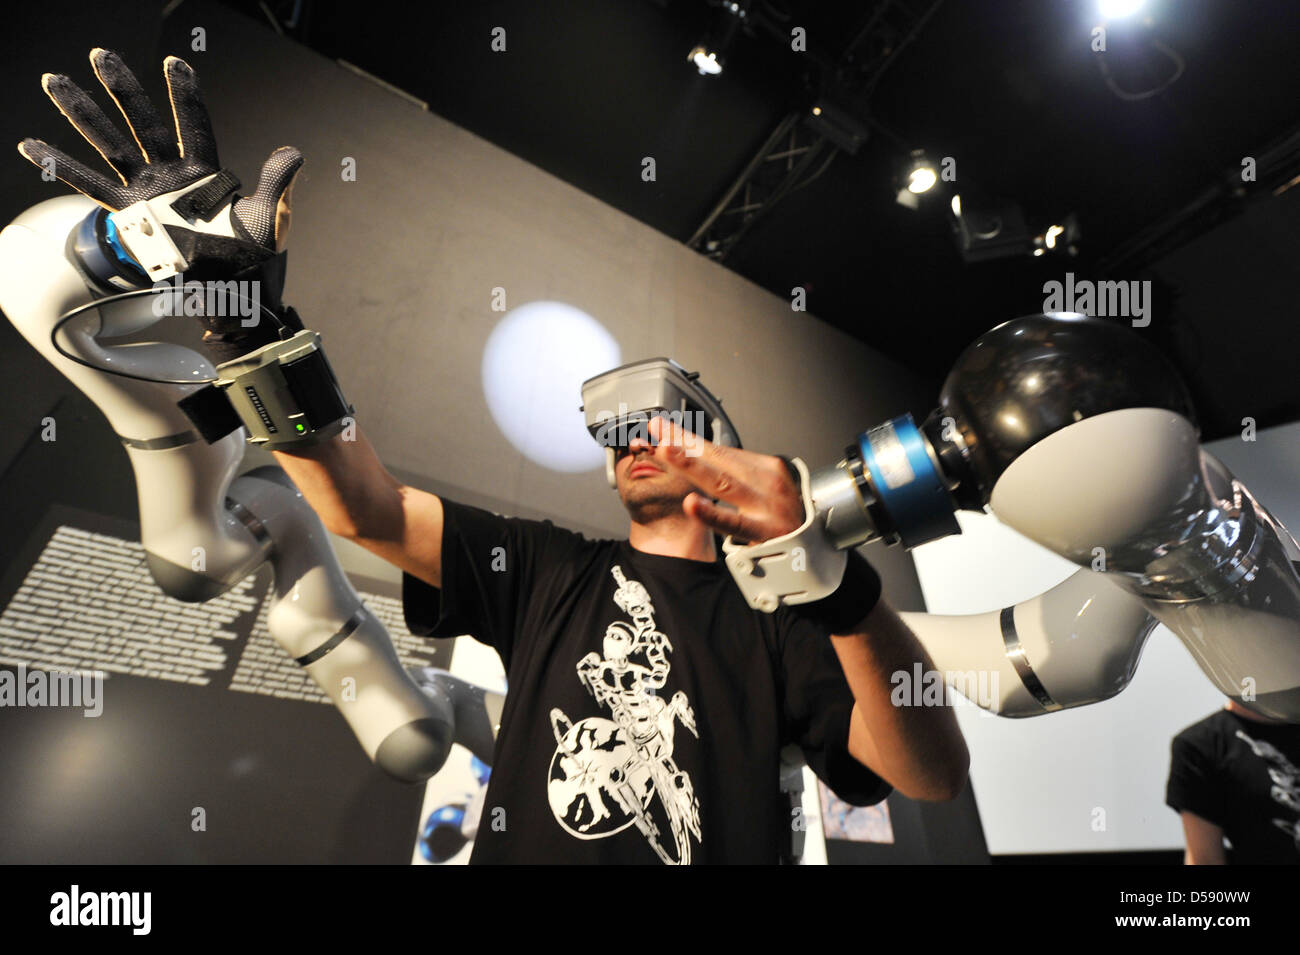 A man steers the humanoid robot 'SpaceJustin' in a simulated space mission at the Space Pavillon of the International Aerospace Exhibition (ILA) in Schoenefeld, Germany, 04 June 2010. From 08 to 13 June 2010, 1150 exhibitors from 48 countries present innovative products and showcase aircrafts in many sizes and categories on ground and in the air. Photo: BERND SETTNIK Stock Photo